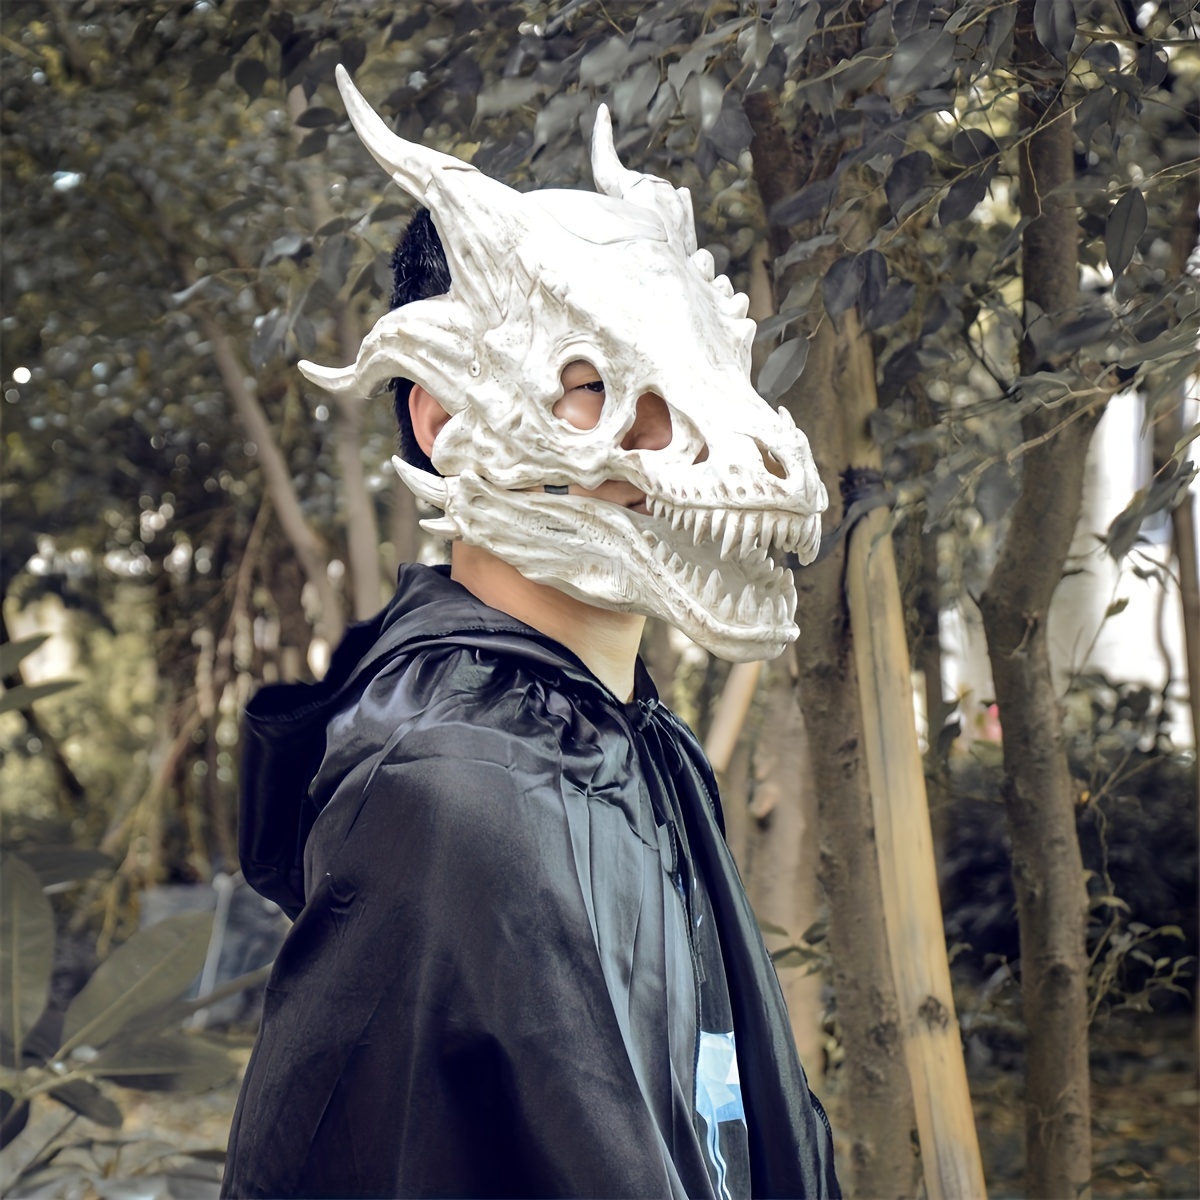 

Premium Cool Y2k Natural Latex White Dragon Skeleton Mask, With Moving Mouth Headgear Prank Prop, Halloween Cosplay Photo Prop, Larp Party Funny Supply, Stage Performance Accessory